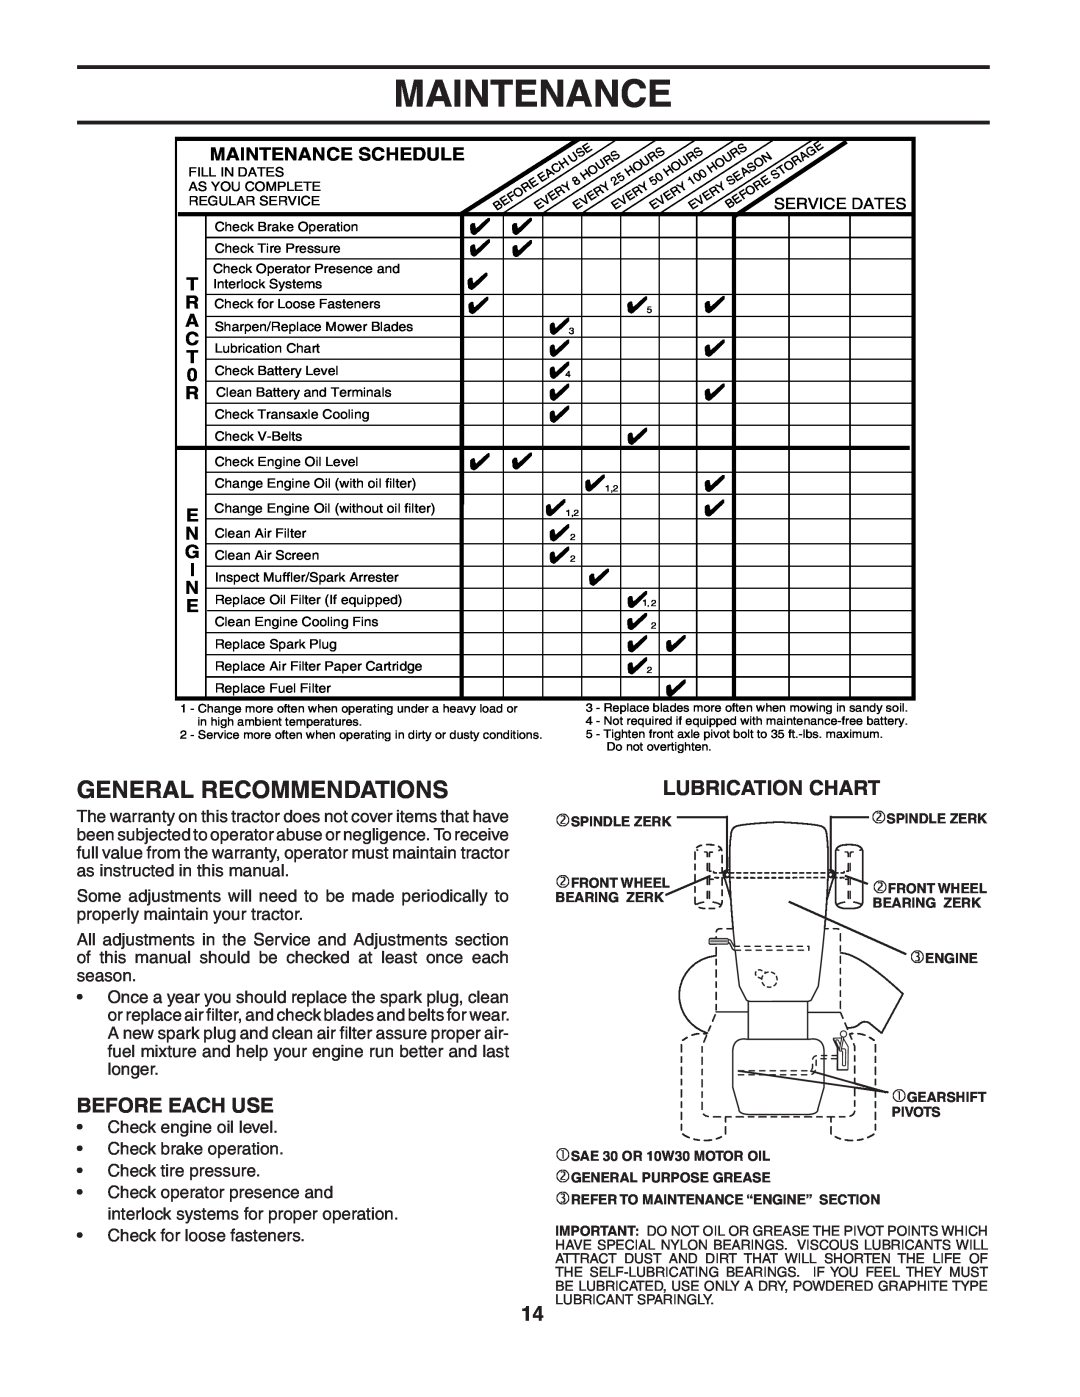 Weed Eater WET2242STB manual Maintenance, General Recommendations, Before Each Use, Lubrication Chart 